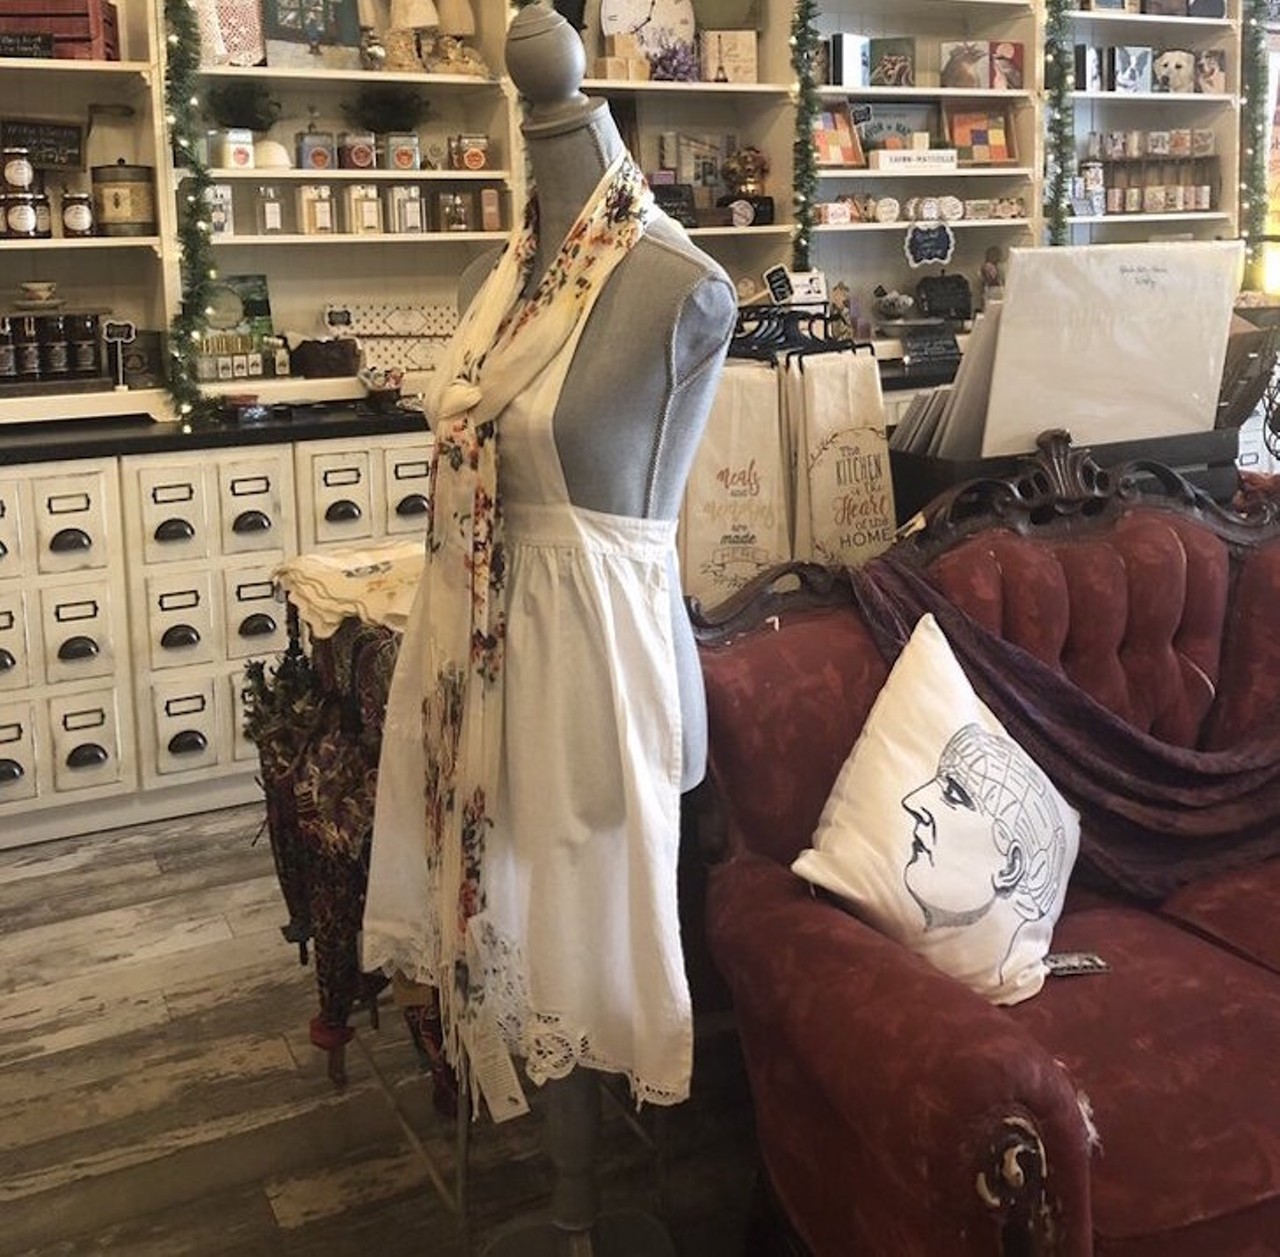 The Rosie Lee Co.  
111 E. First St., Sanford, 321-315-1370
This tea bar has more loose leaf teas to count and while they&#146;re not a traditional tea room, you&#146;ll forget all about that as you step into this vintage-style shop and sip from their delicate china. 
Photo via Yelp/Hanny L.